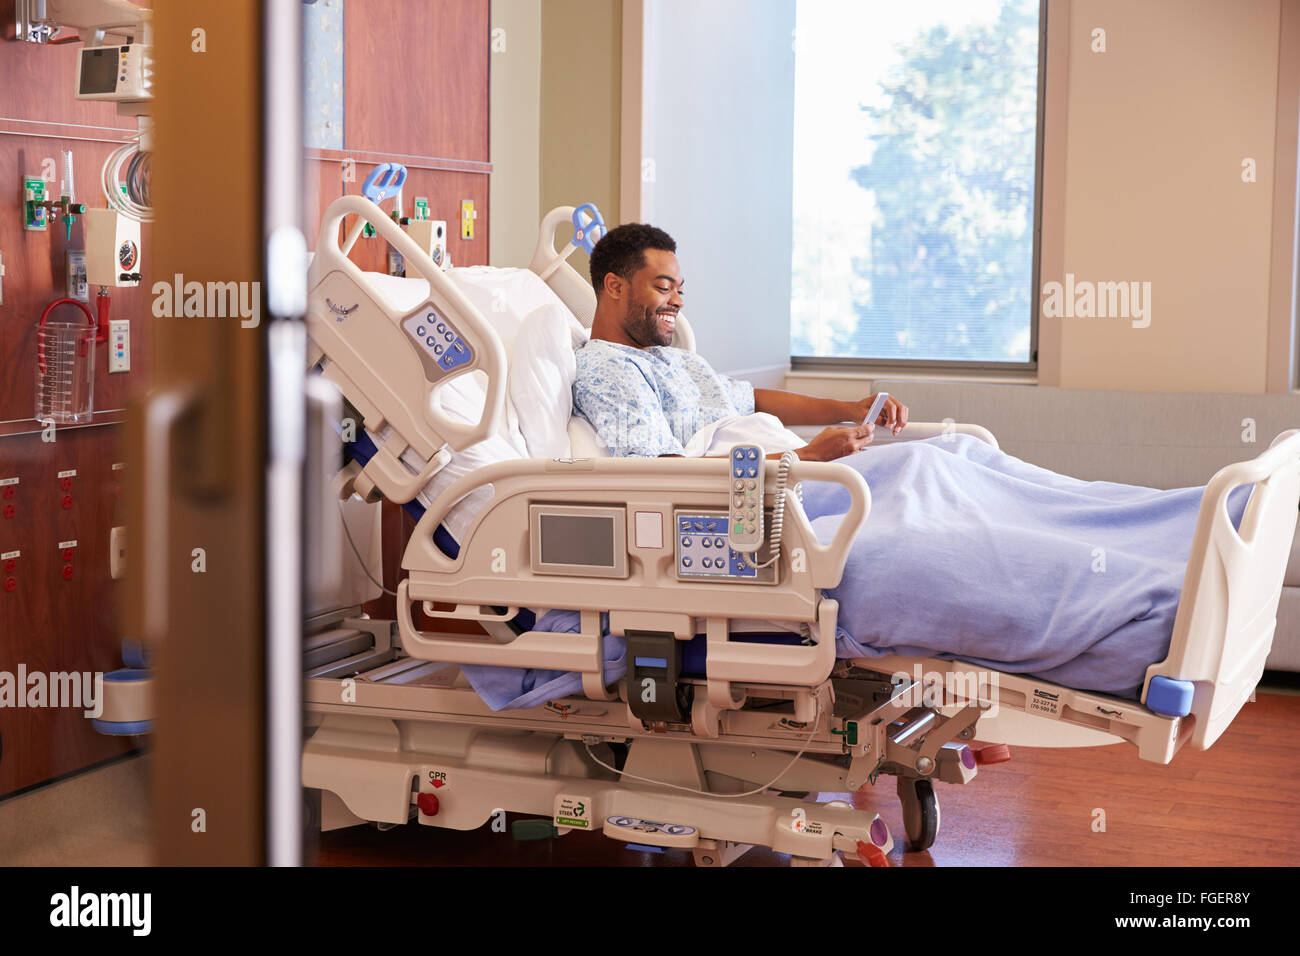 Male Patient In Hospital Bed Using Cellphone Stock Photo